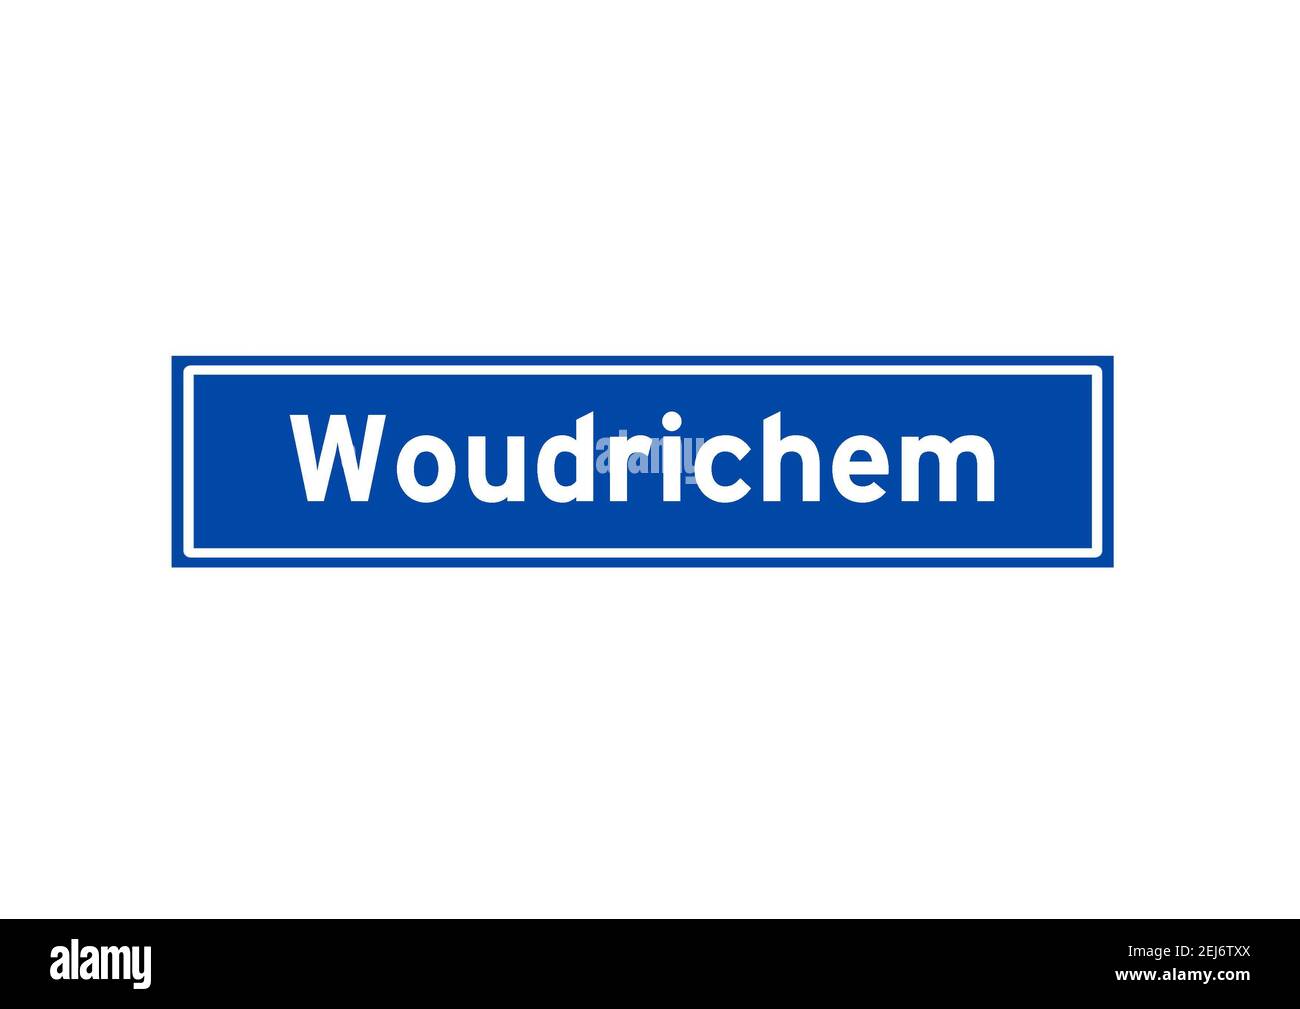 Woudrichem isolated Dutch place name sign. City sign from the Netherlands. Stock Photo